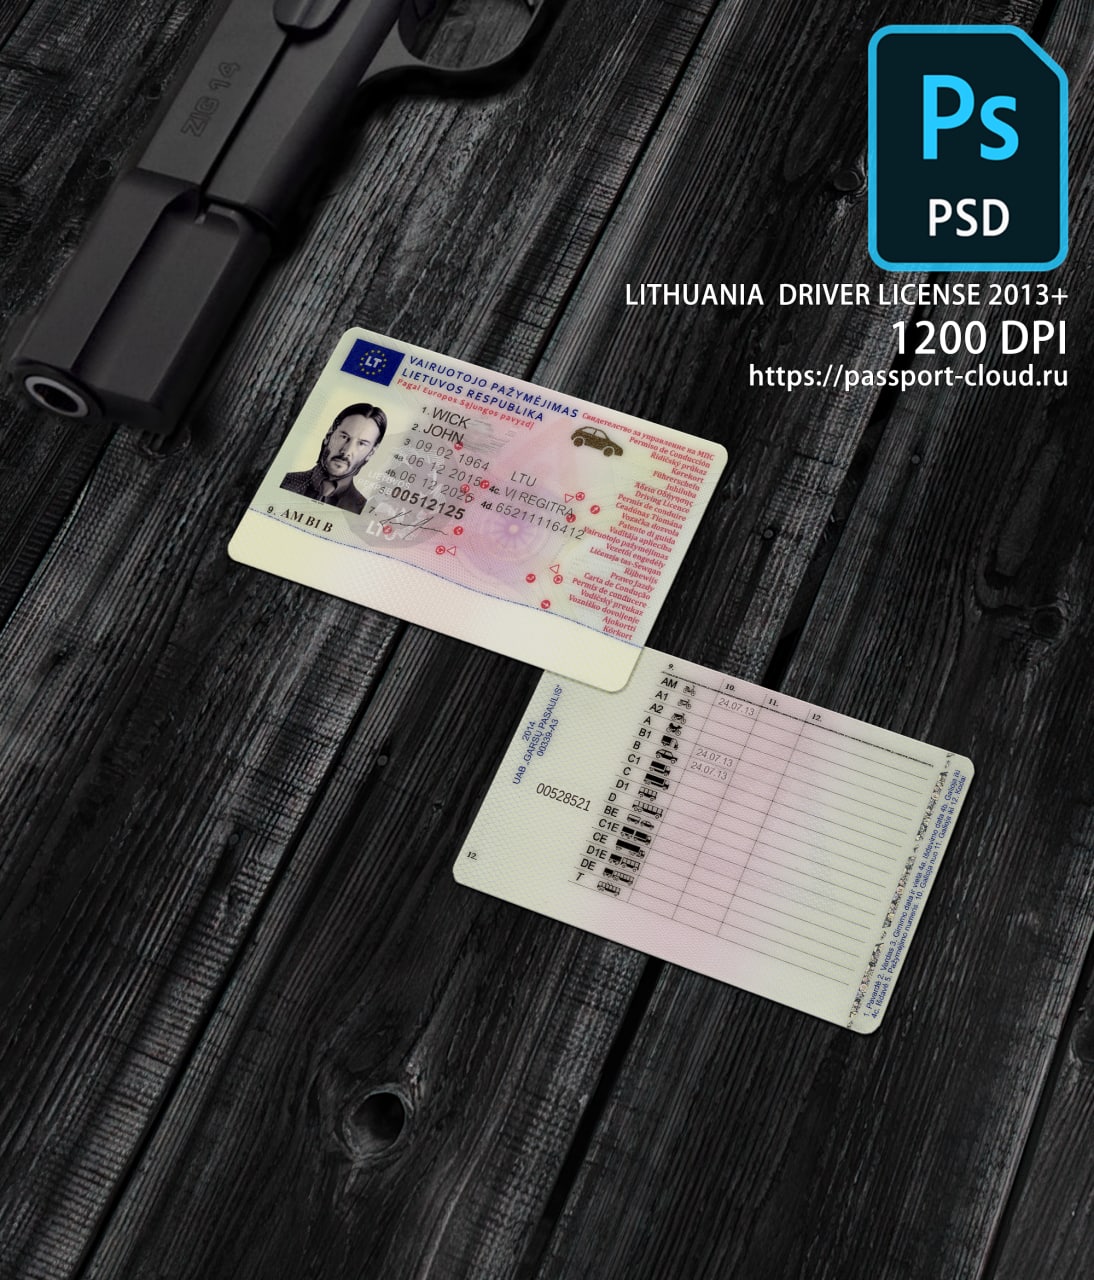 Lithuania Driver License 2013+1